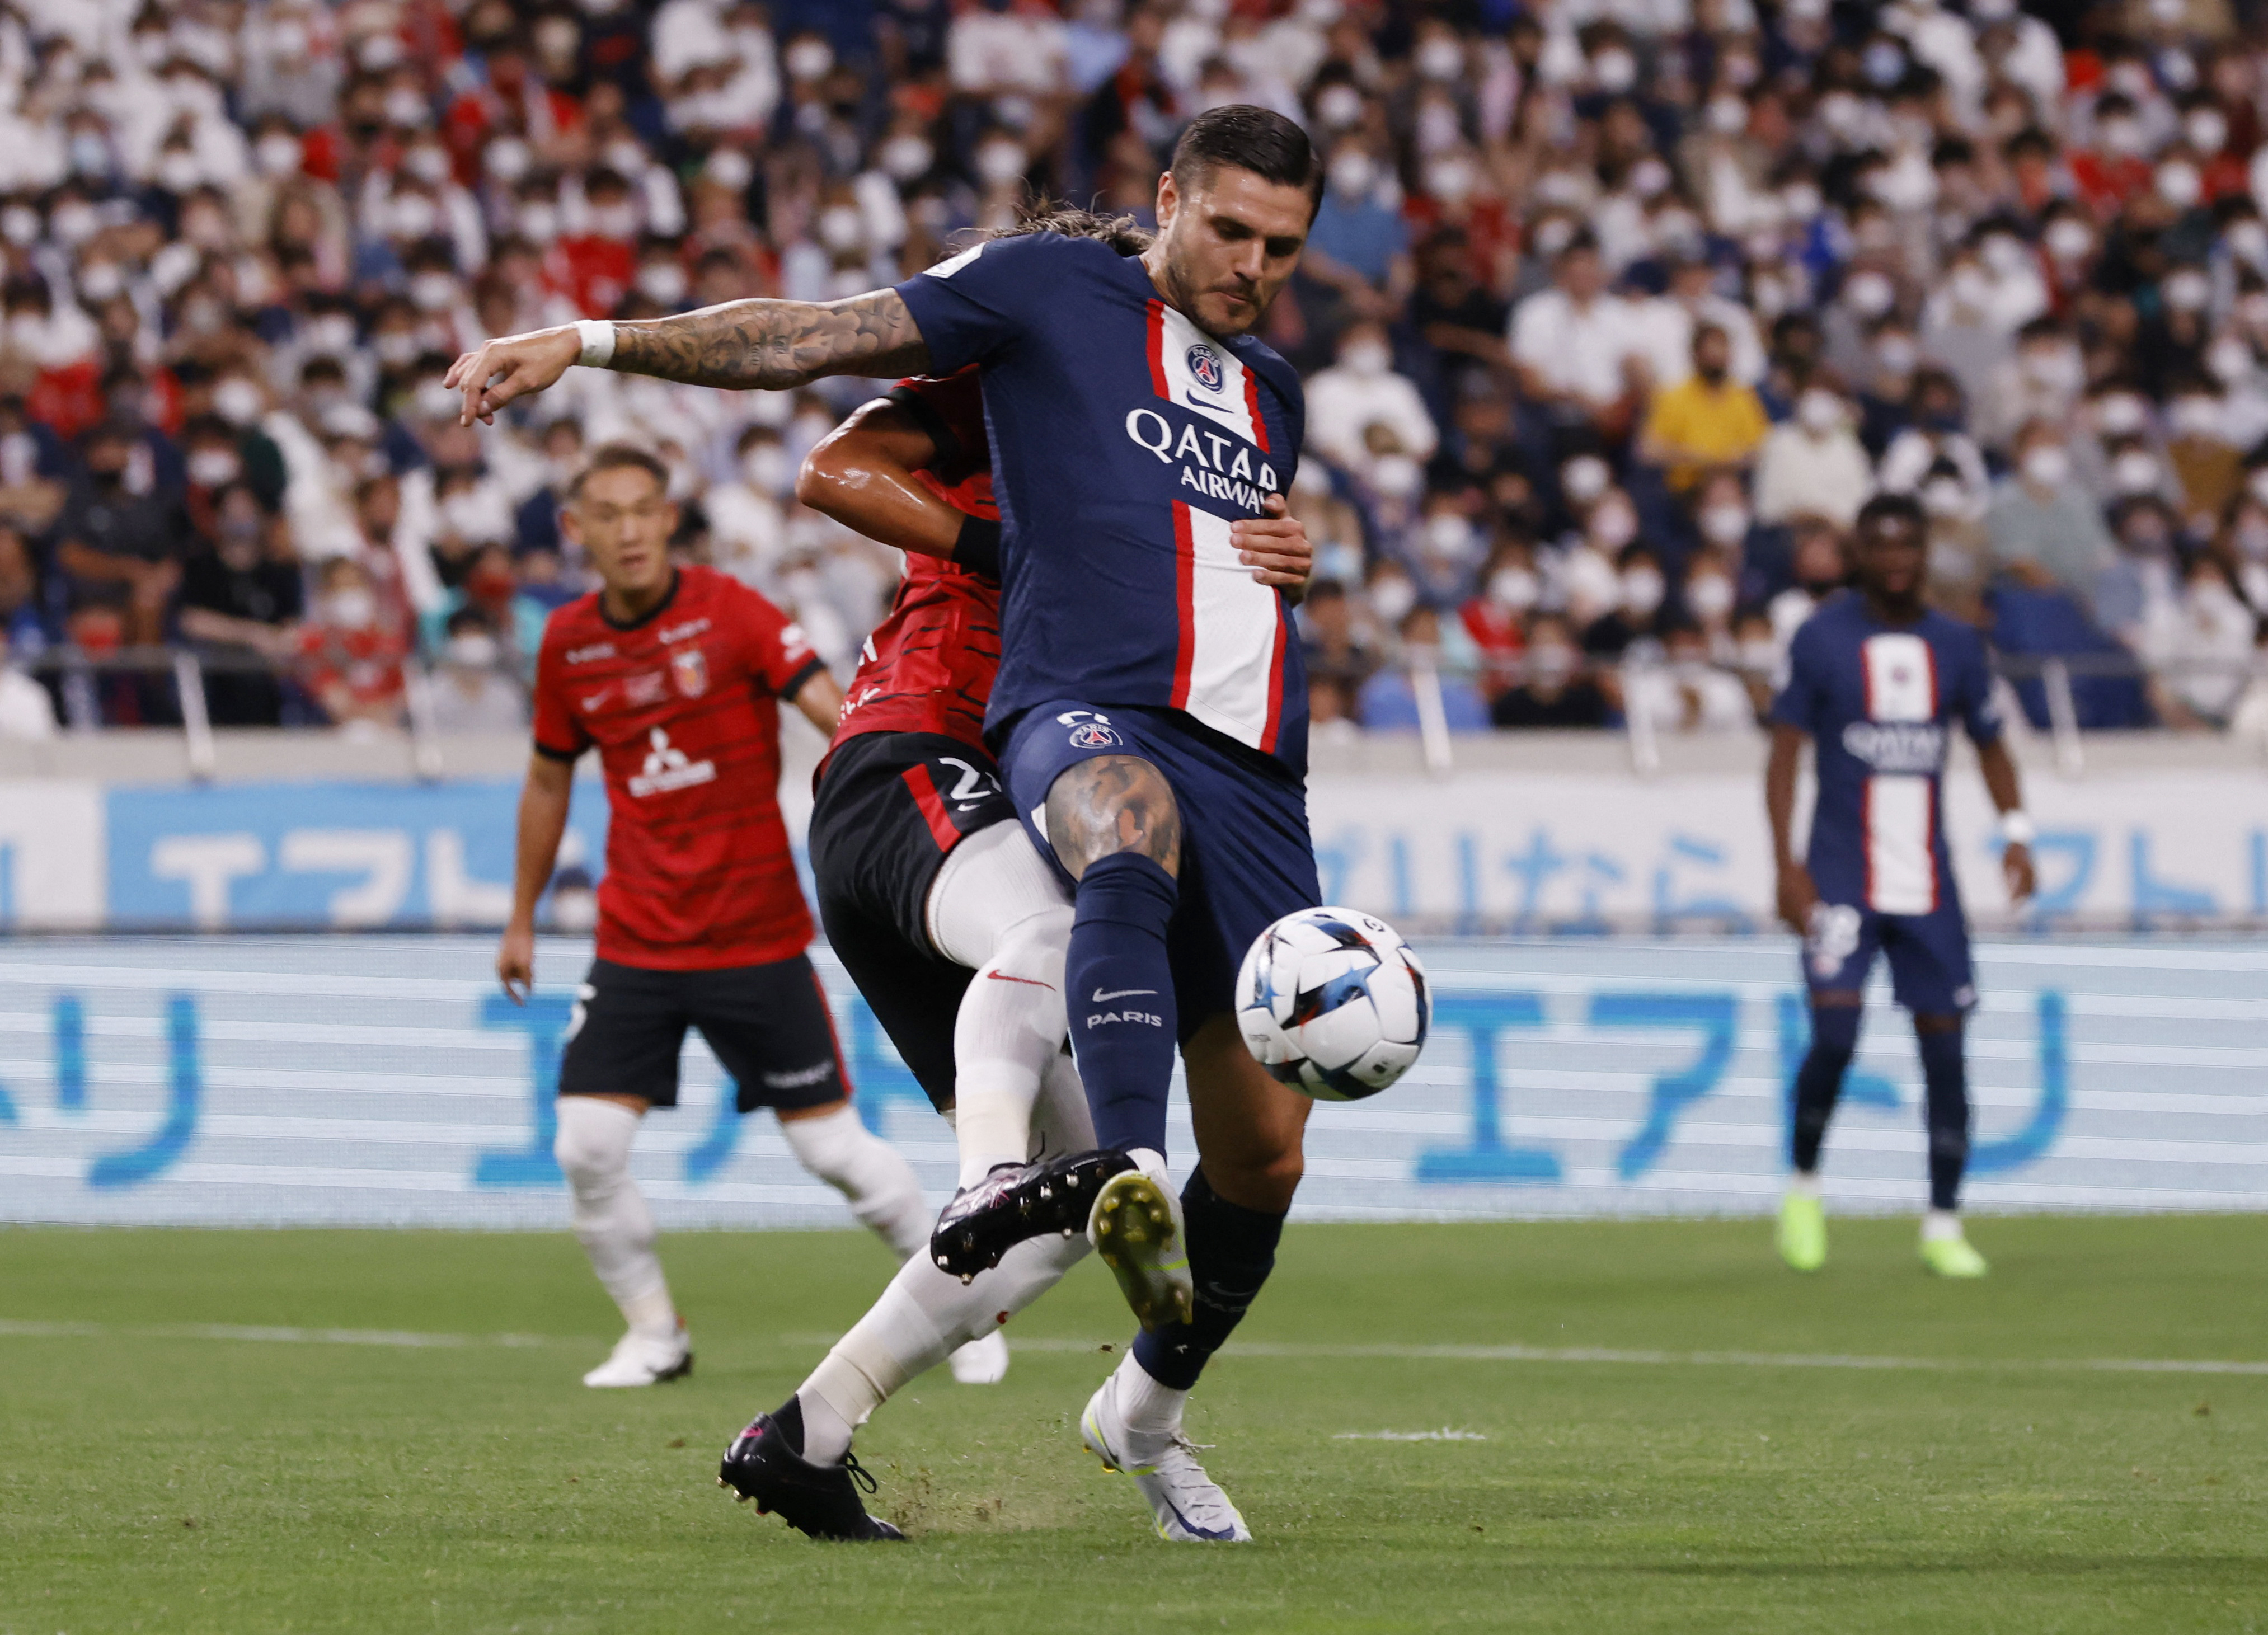 Mauro Icardi had minutes in the preseason with PSG but was left out of all calls at the start of Ligue 1 (Photo: REUTERS)